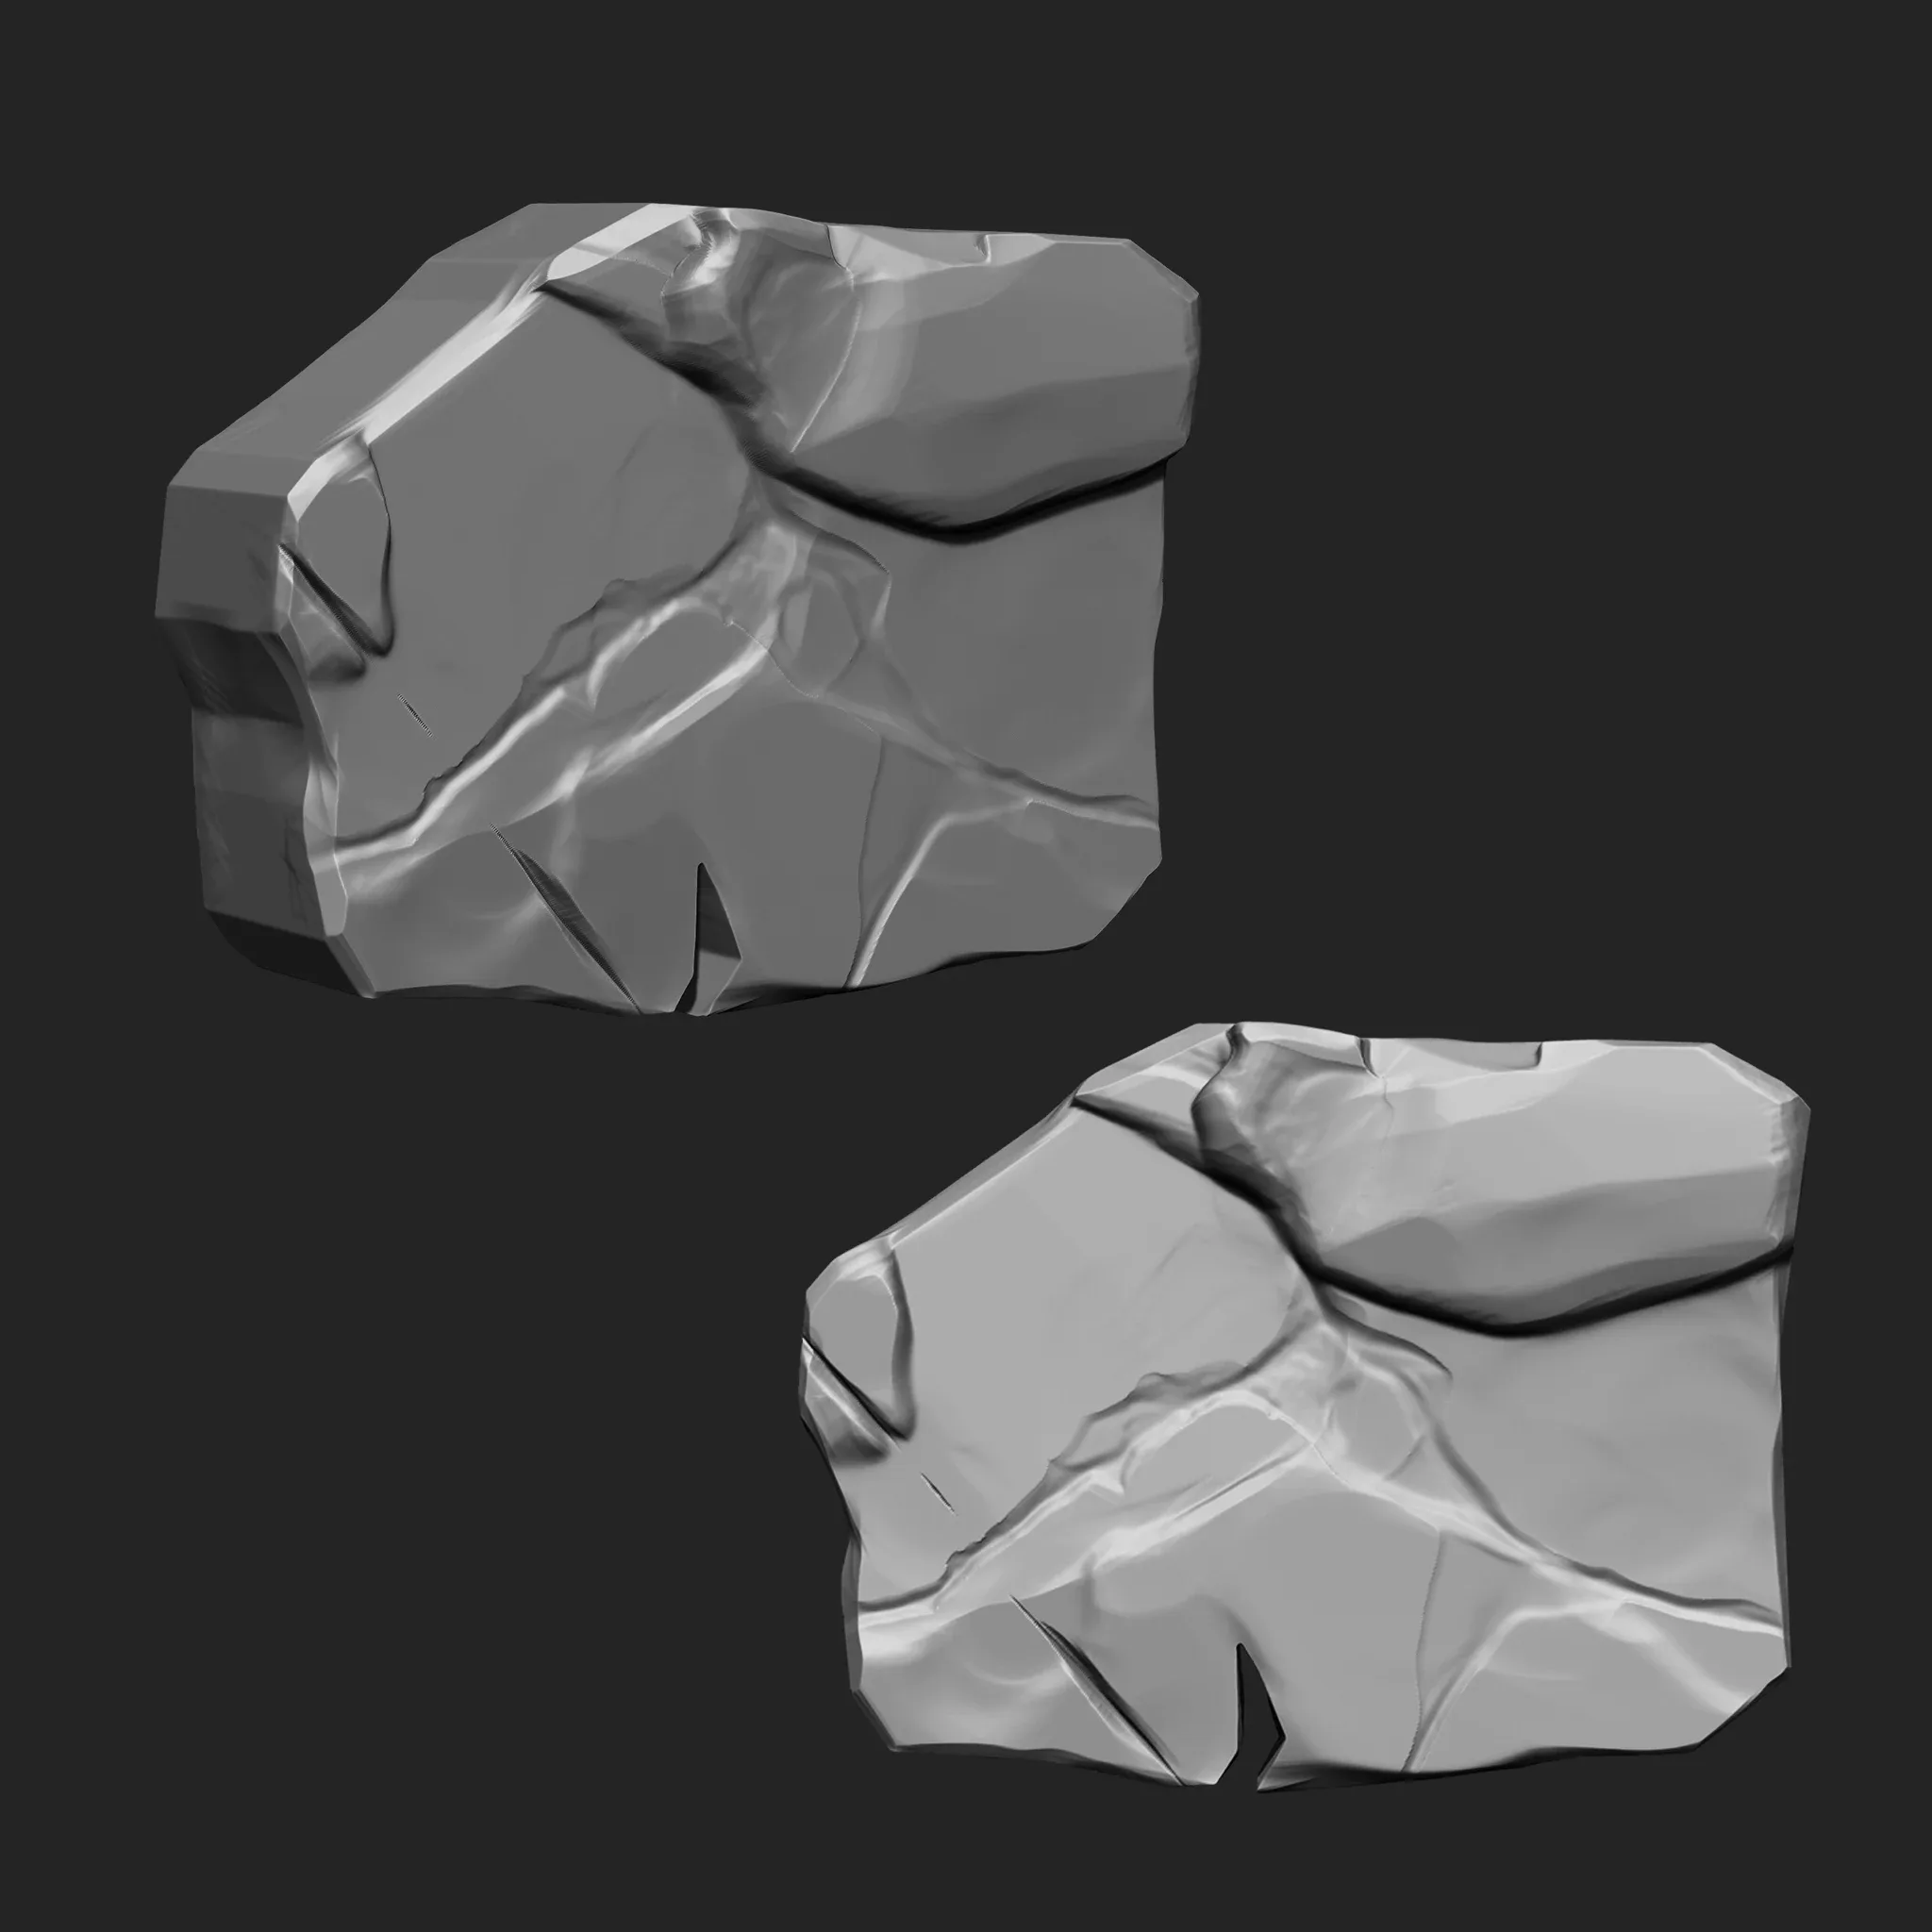 Stylized Stone IMM Brushes 30 in one Vol. 3